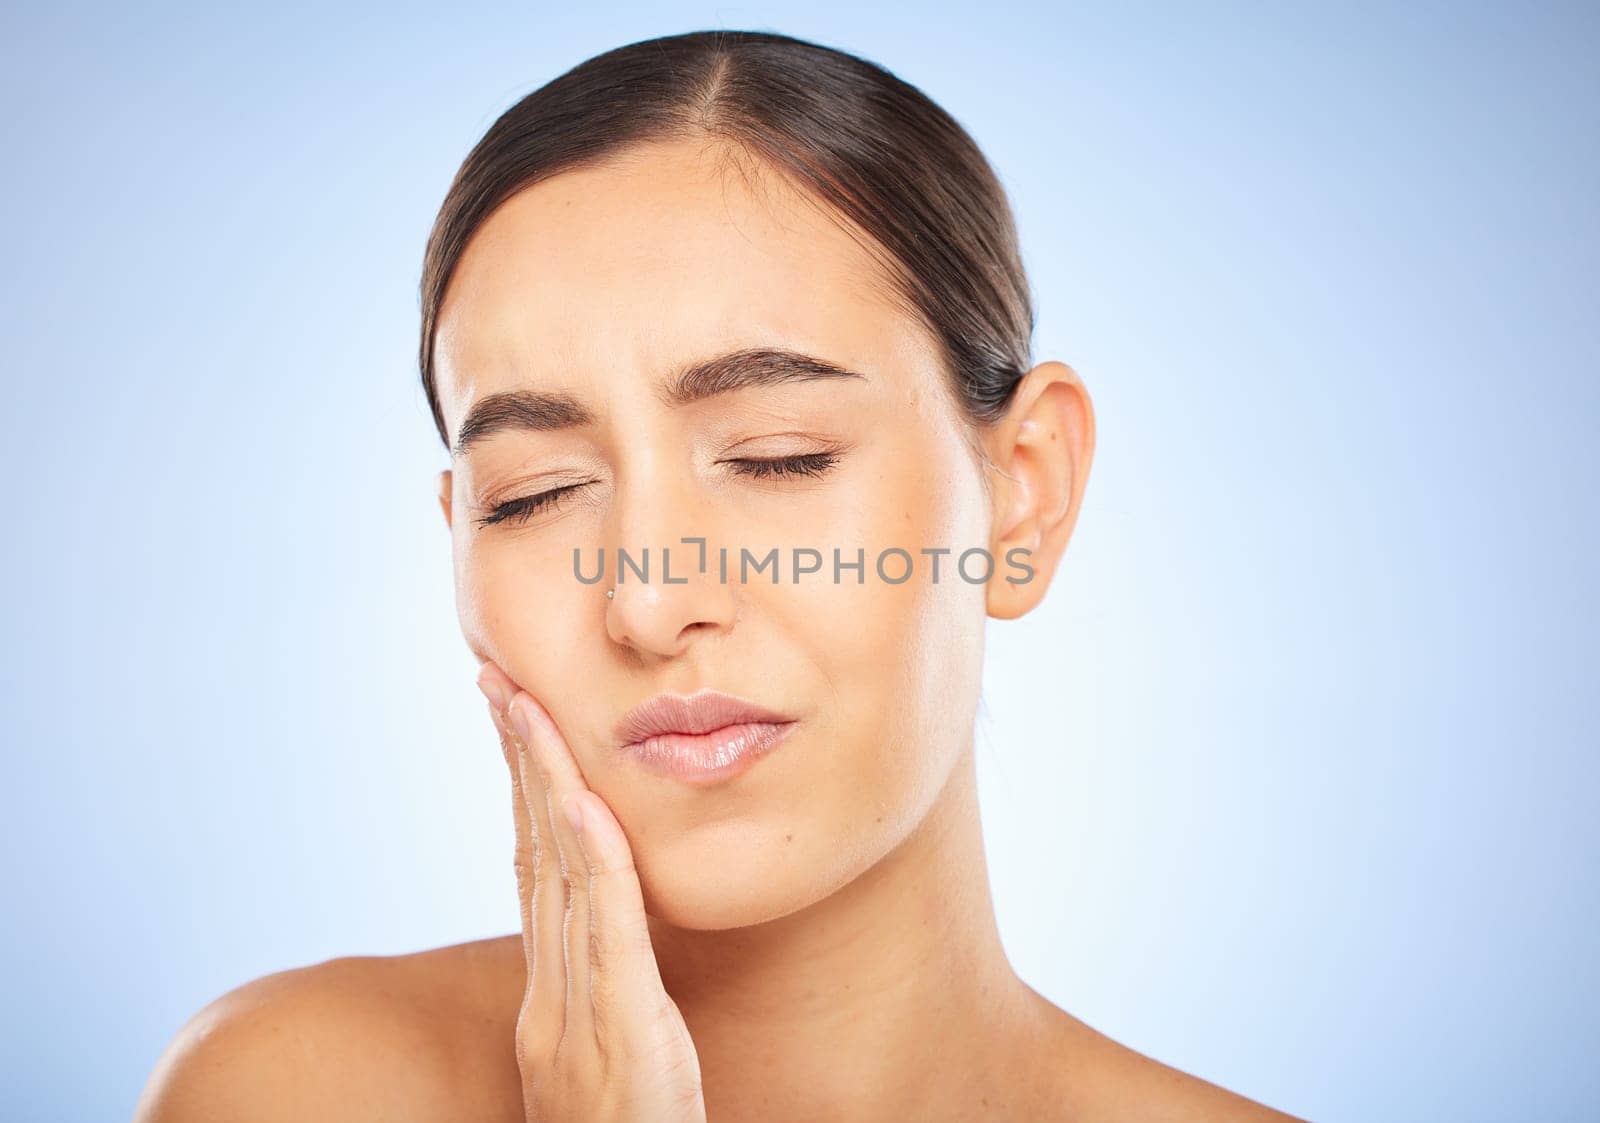 Toothache, pain and cavity with a model woman holding her mouth in studio on a blue background for oral care. Dental hygiene, plaque and face with an attractive young female rubbing her sore cheek.